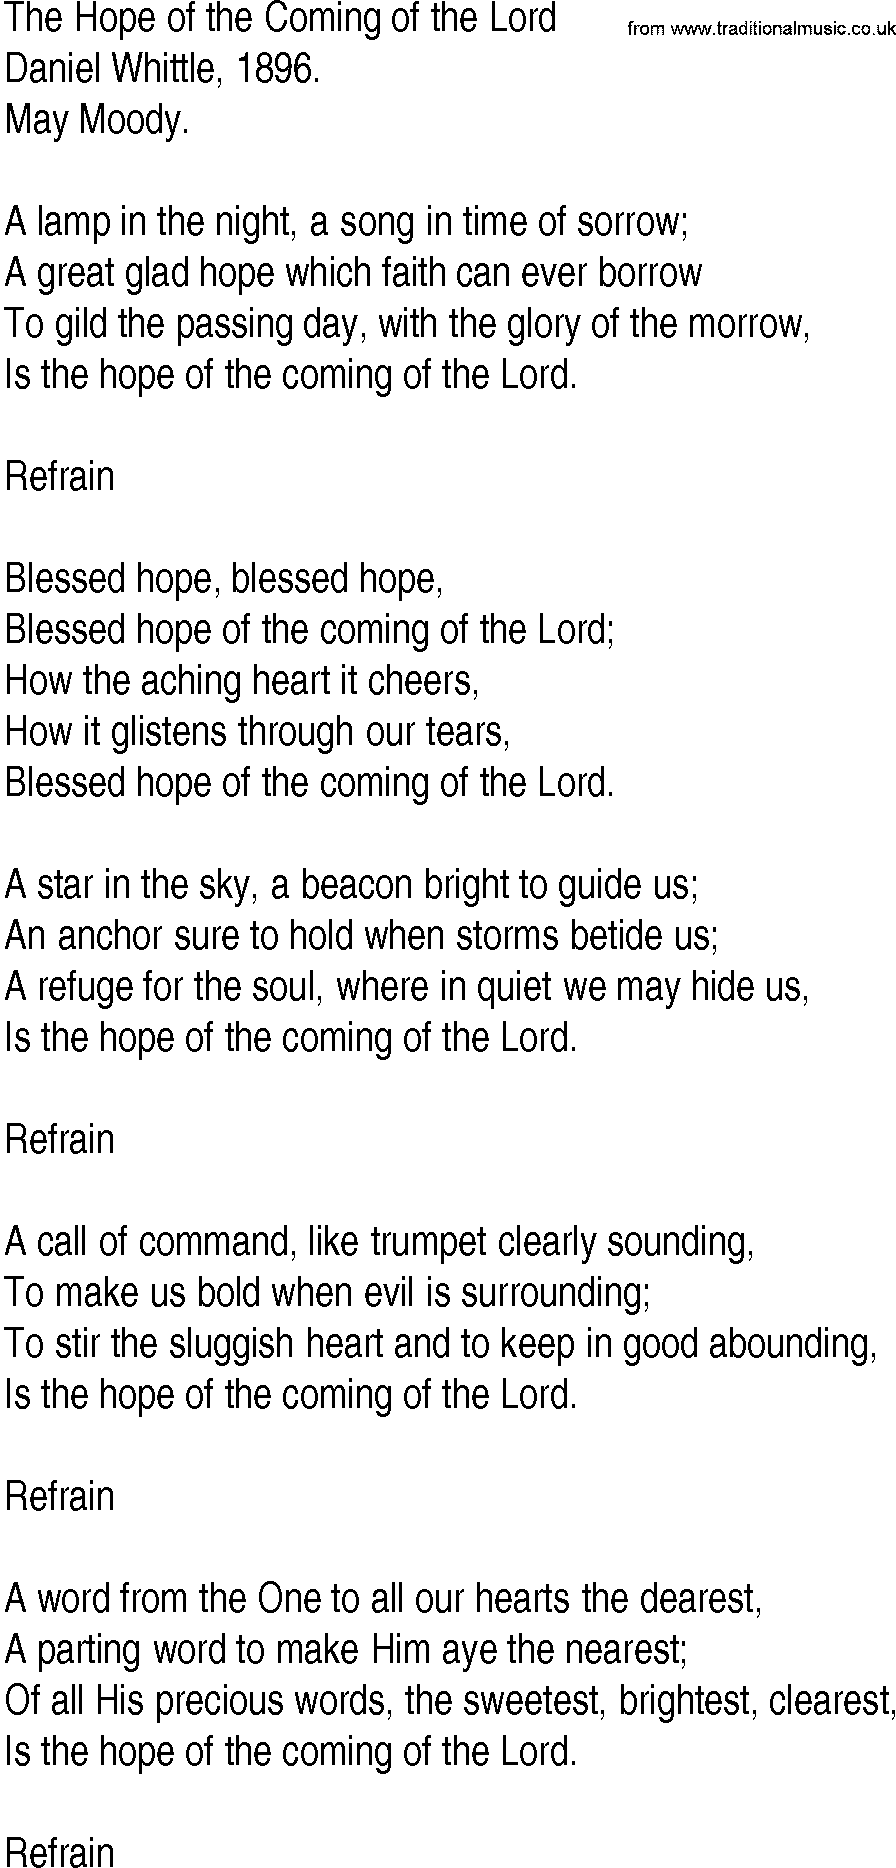 Hymn and Gospel Song: The Hope of the Coming of the Lord by Daniel Whittle lyrics